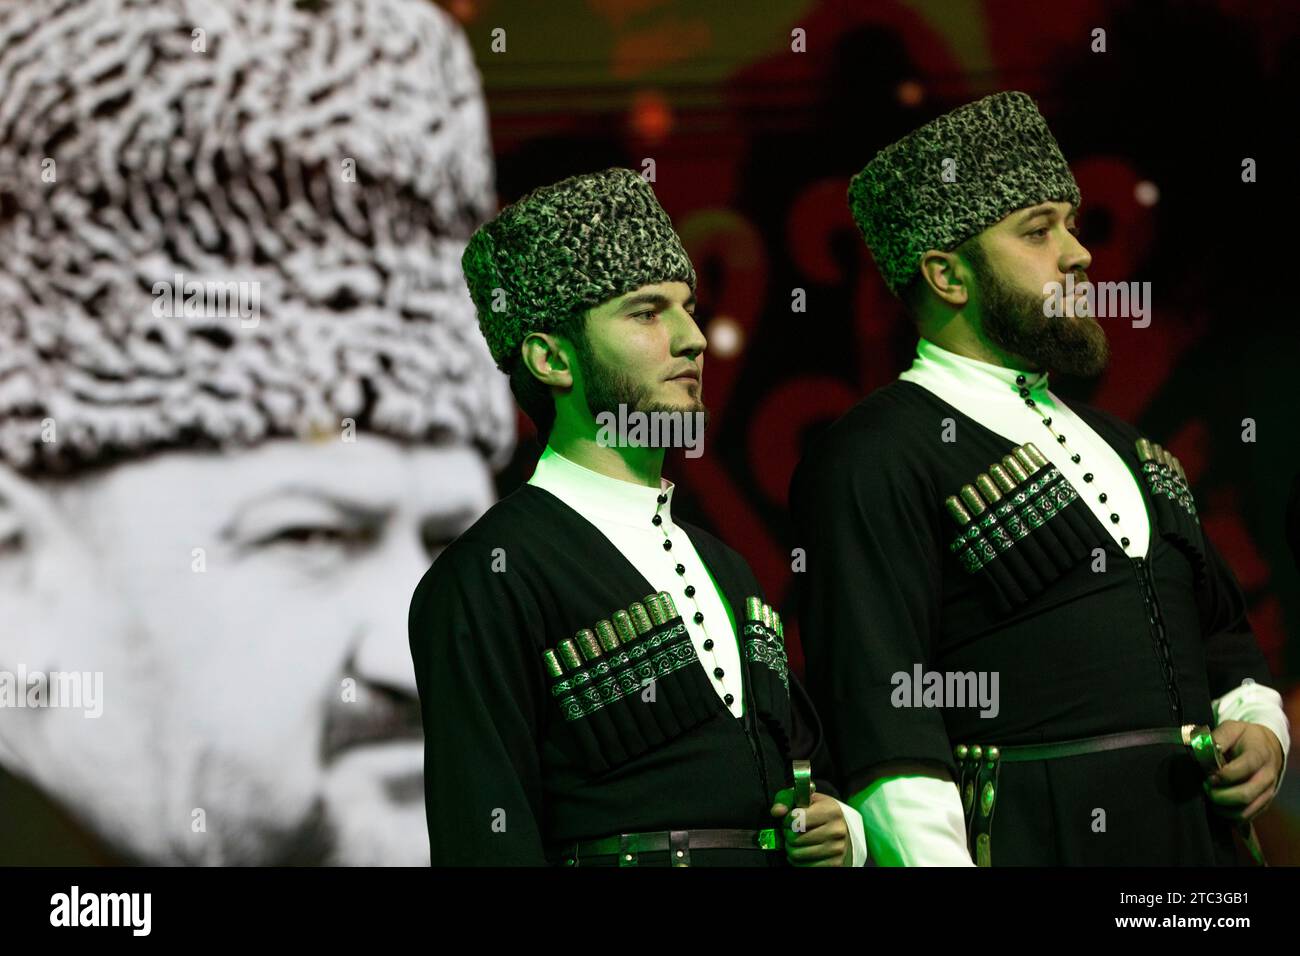 Moscow, Russia. 10th of December, 2023. Performers at the opening of Chechen Republic Day during the Russia Expo international exhibition and forum at the VDNKh exhibition centre in Moscow, Russia. Credit: Nikolay Vinokurov/Alamy Live News Stock Photo